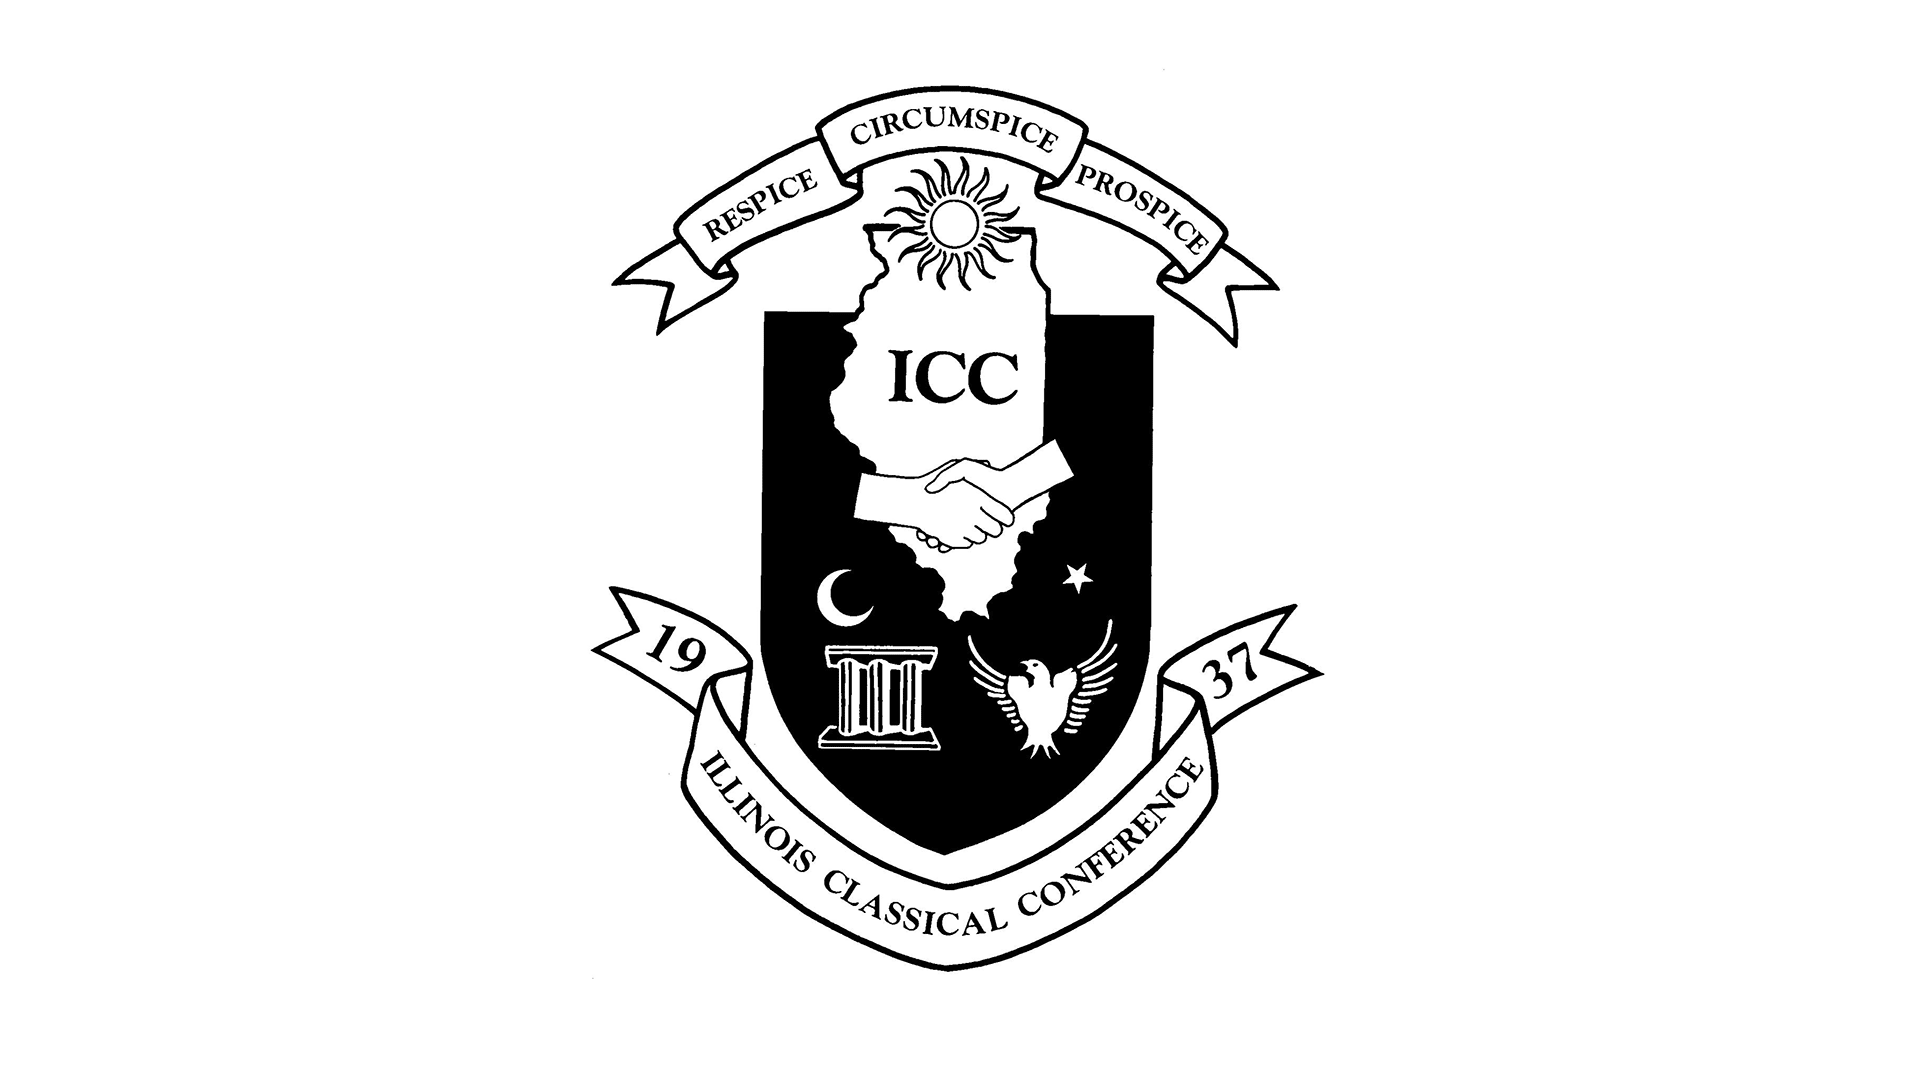 Illinois Classical Conference crest (respice, circumspice, prospice, 1937) with sun, handshake, moon, star, pillars, eagle